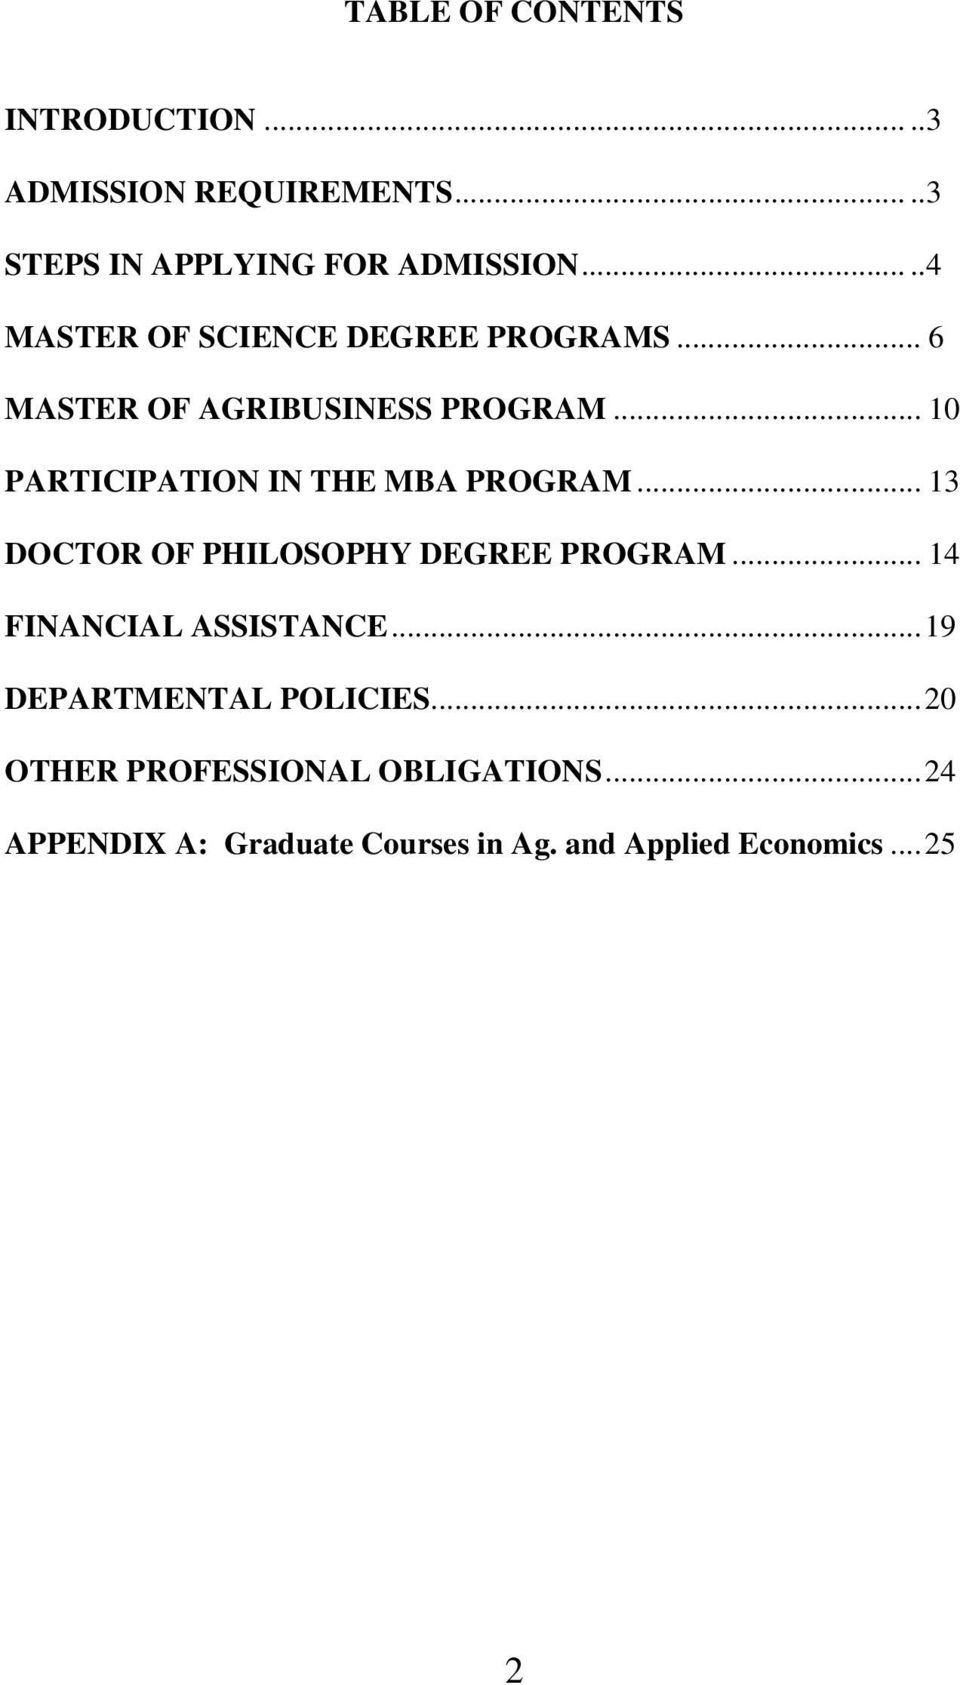 .. 10 PARTICIPATION IN THE MBA PROGRAM... 13 DOCTOR OF PHILOSOPHY DEGREE PROGRAM.